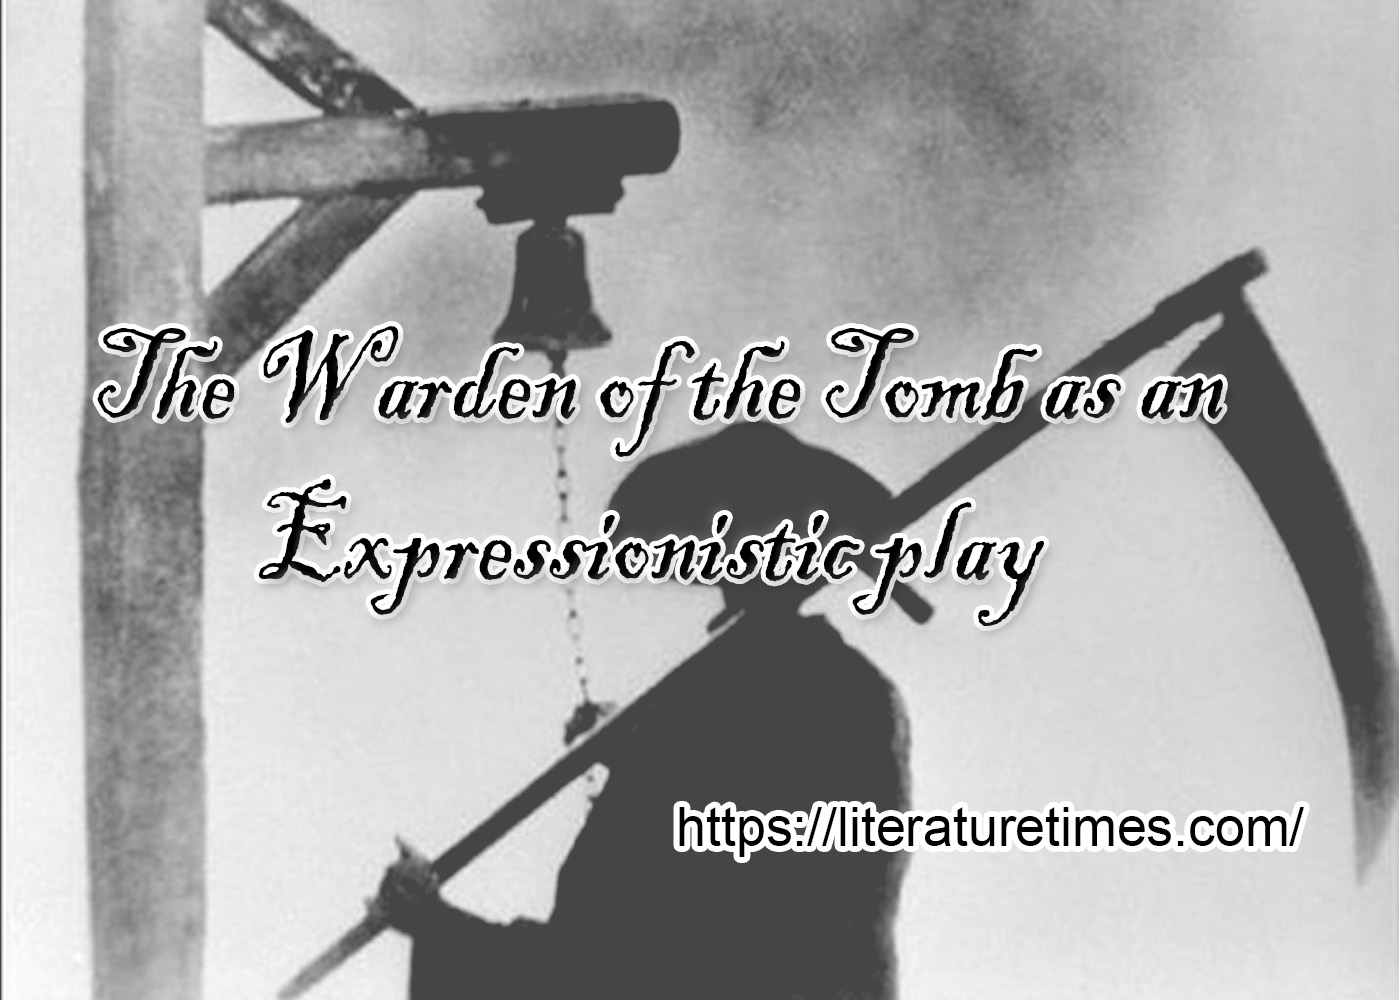 The Warden of the Tomb as an Expressionistic play